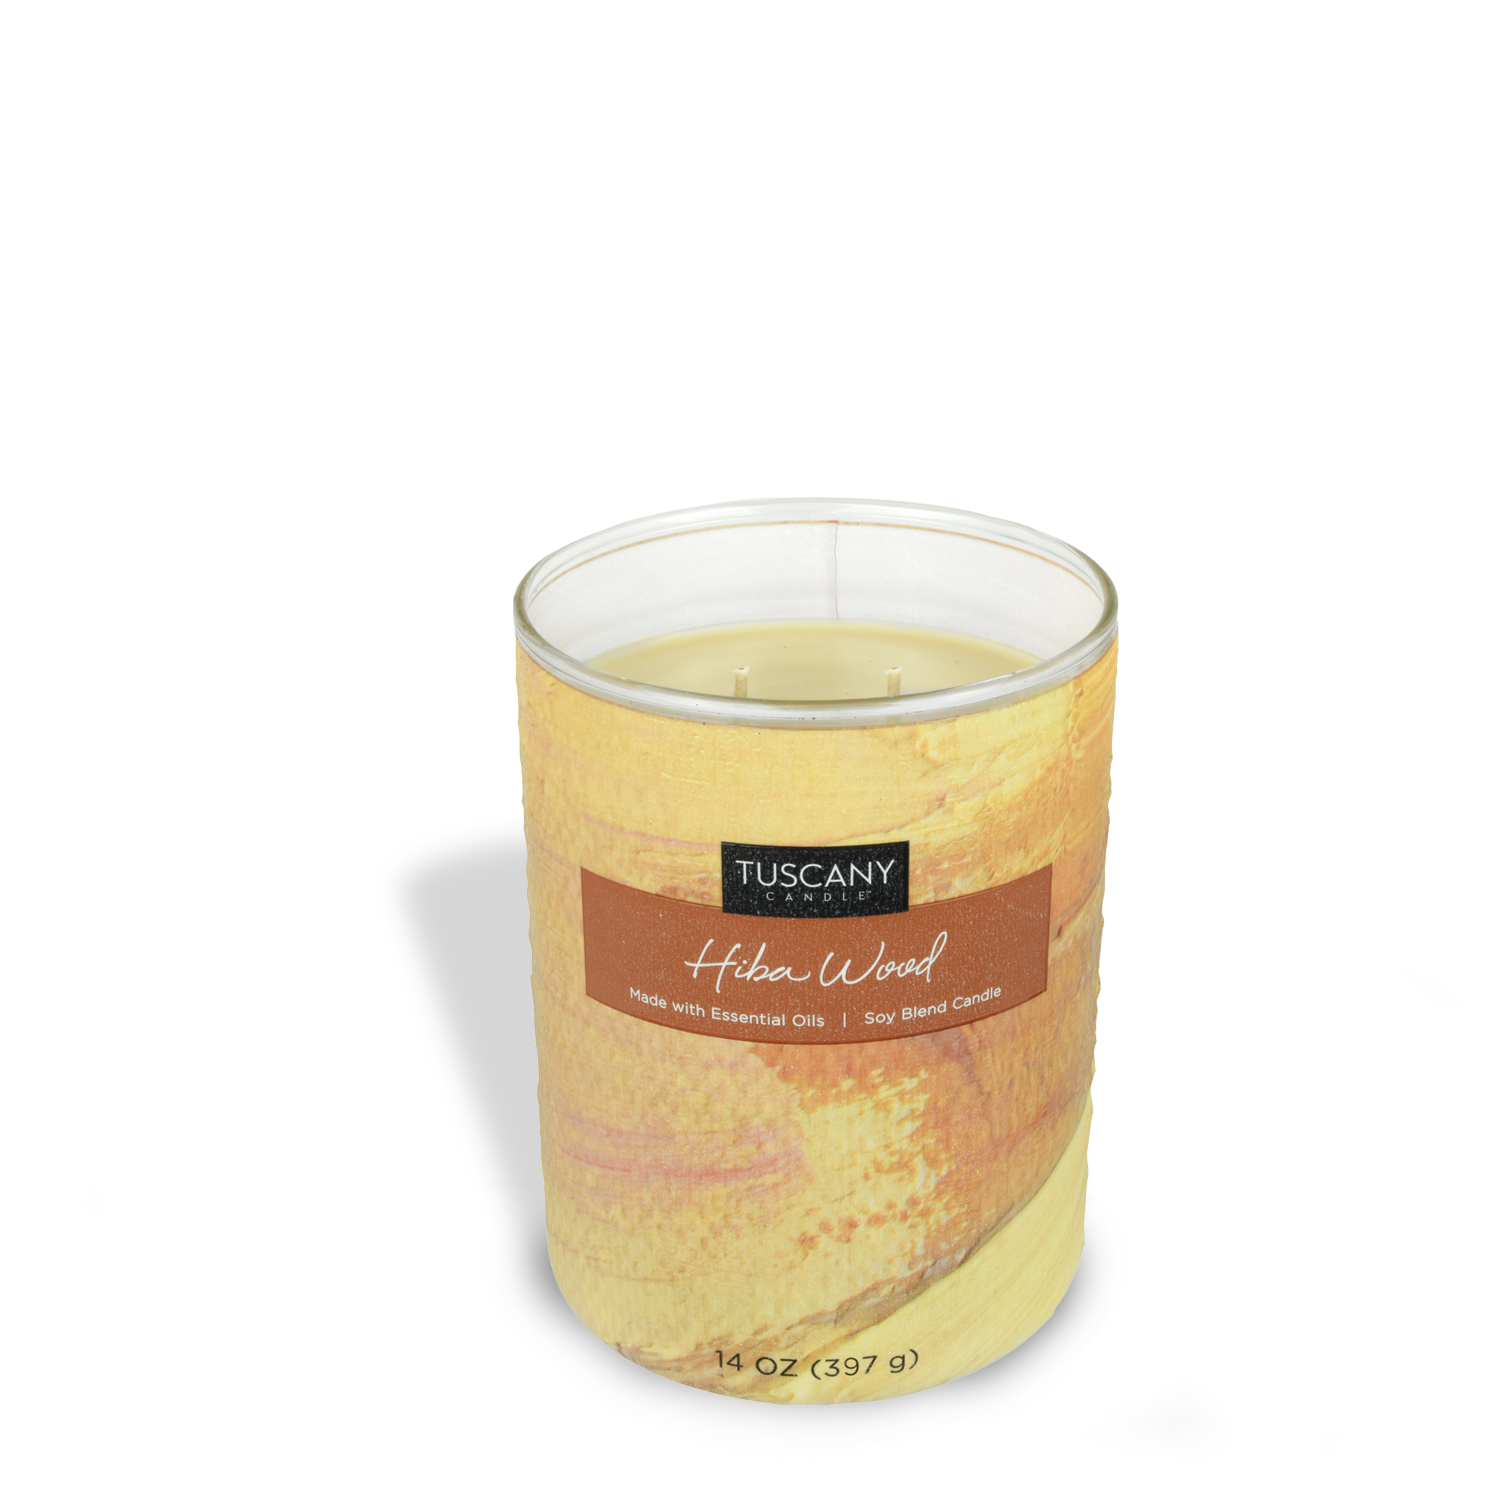 A Hiba Wood Scented Jar Candle (14 oz) – Home Décor Collection by Tuscany Candle with a yellow background.